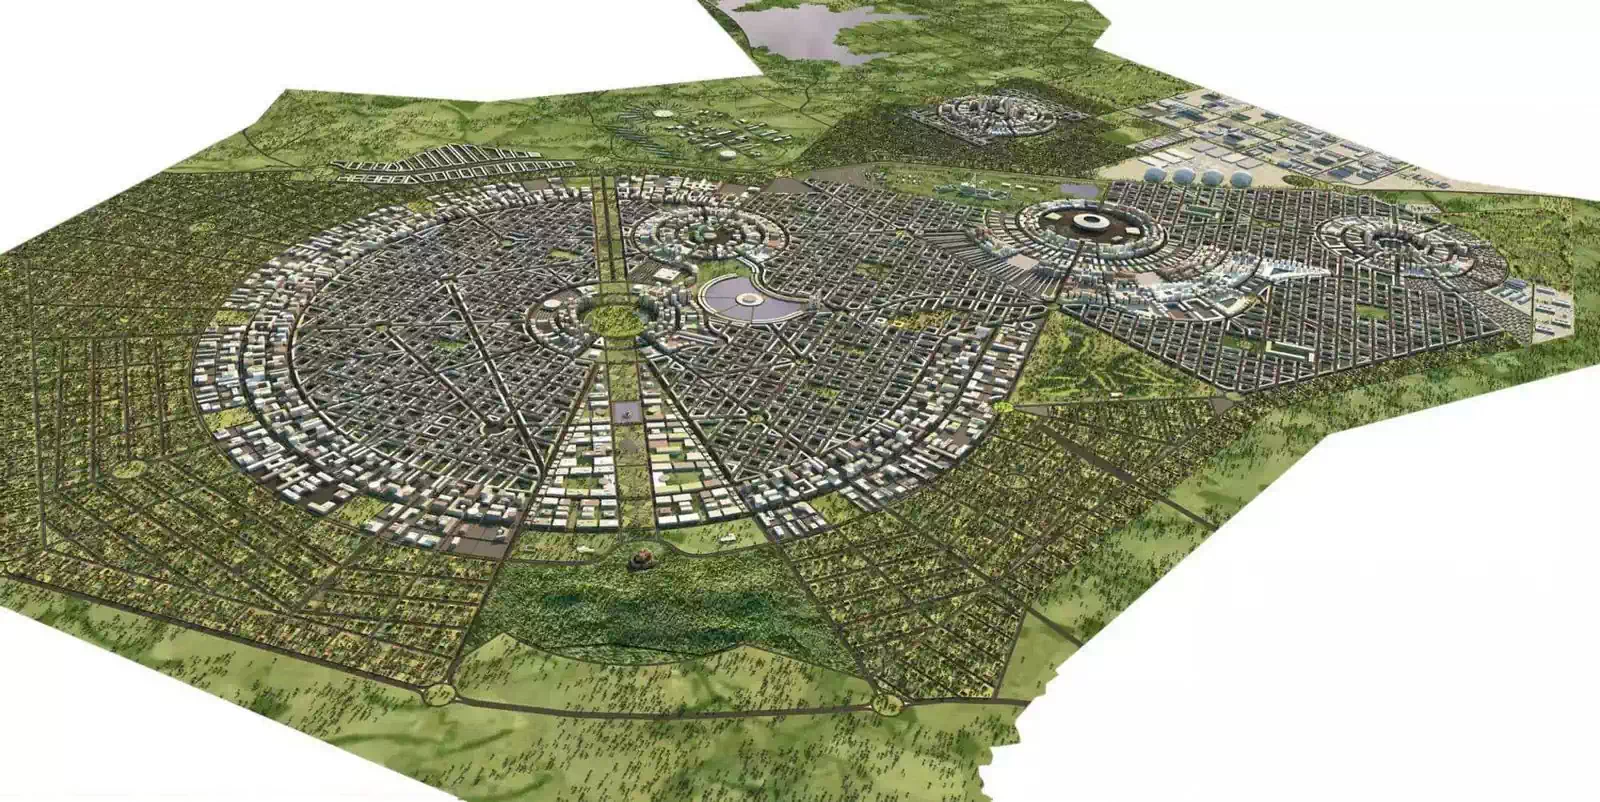 Aerial rendering new city 3d model urban design and town planning